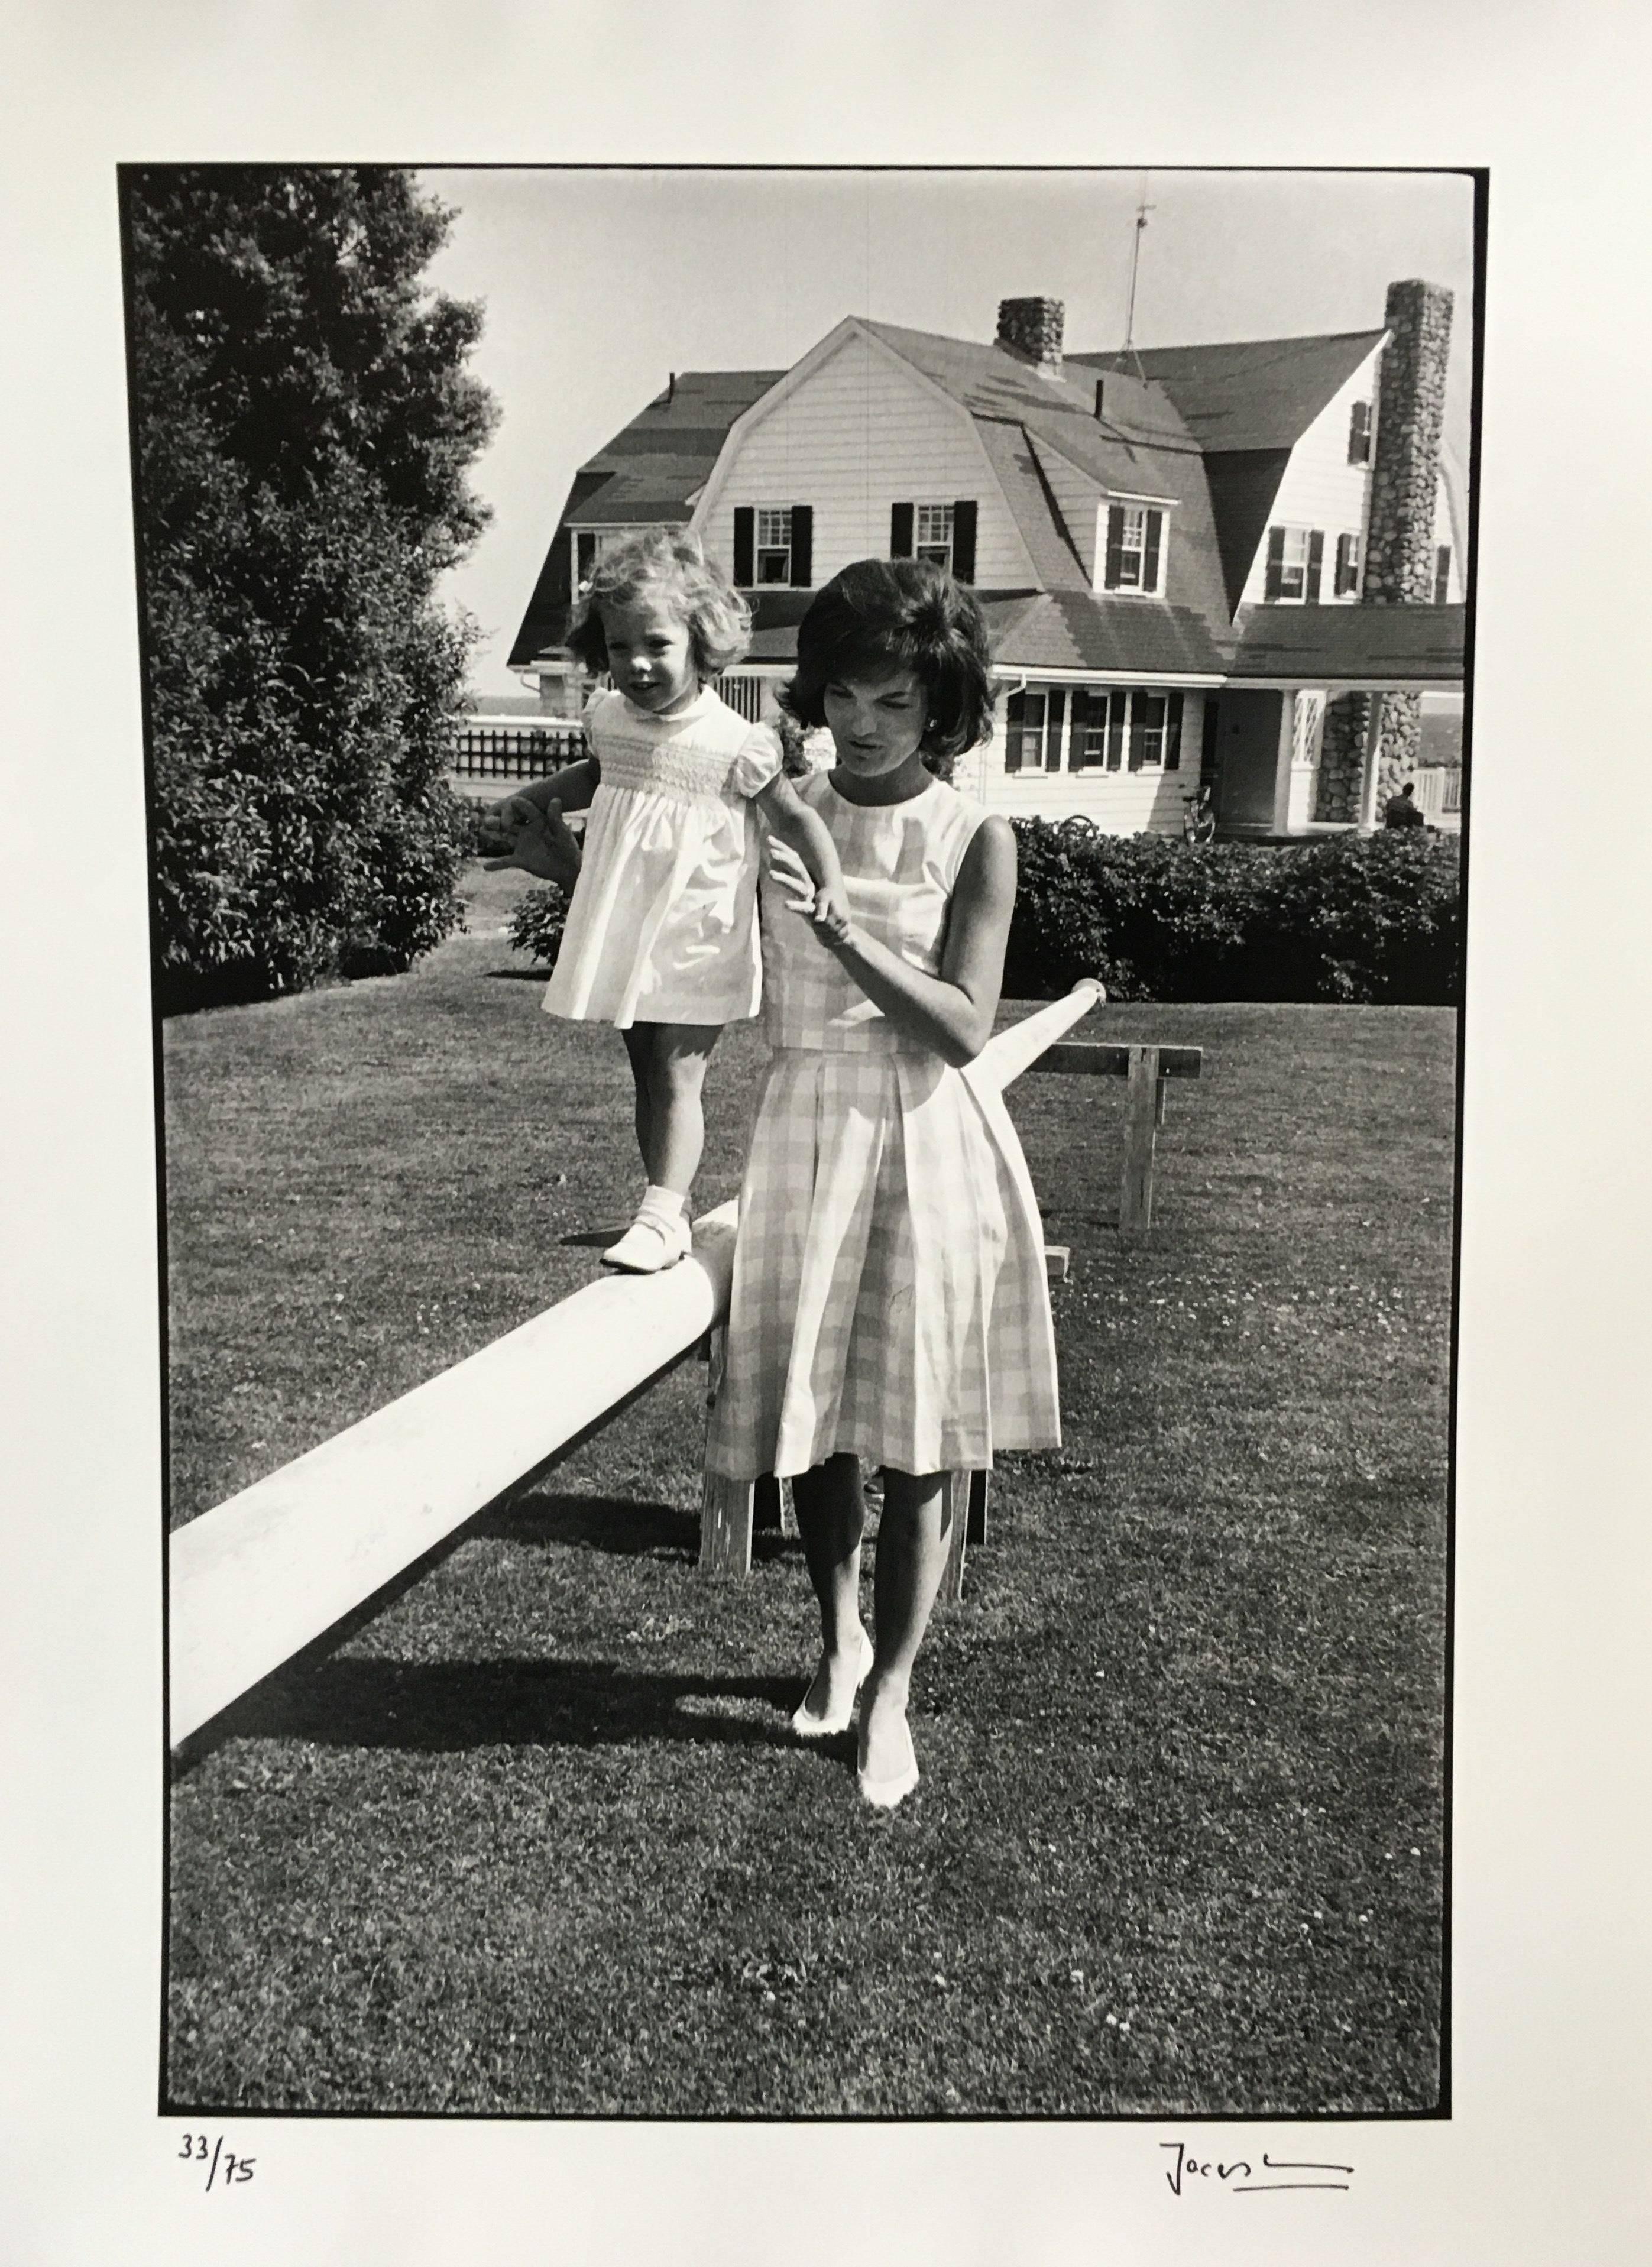 Jackie and Caroline, Hyannis Port - Photograph by Jacques Lowe